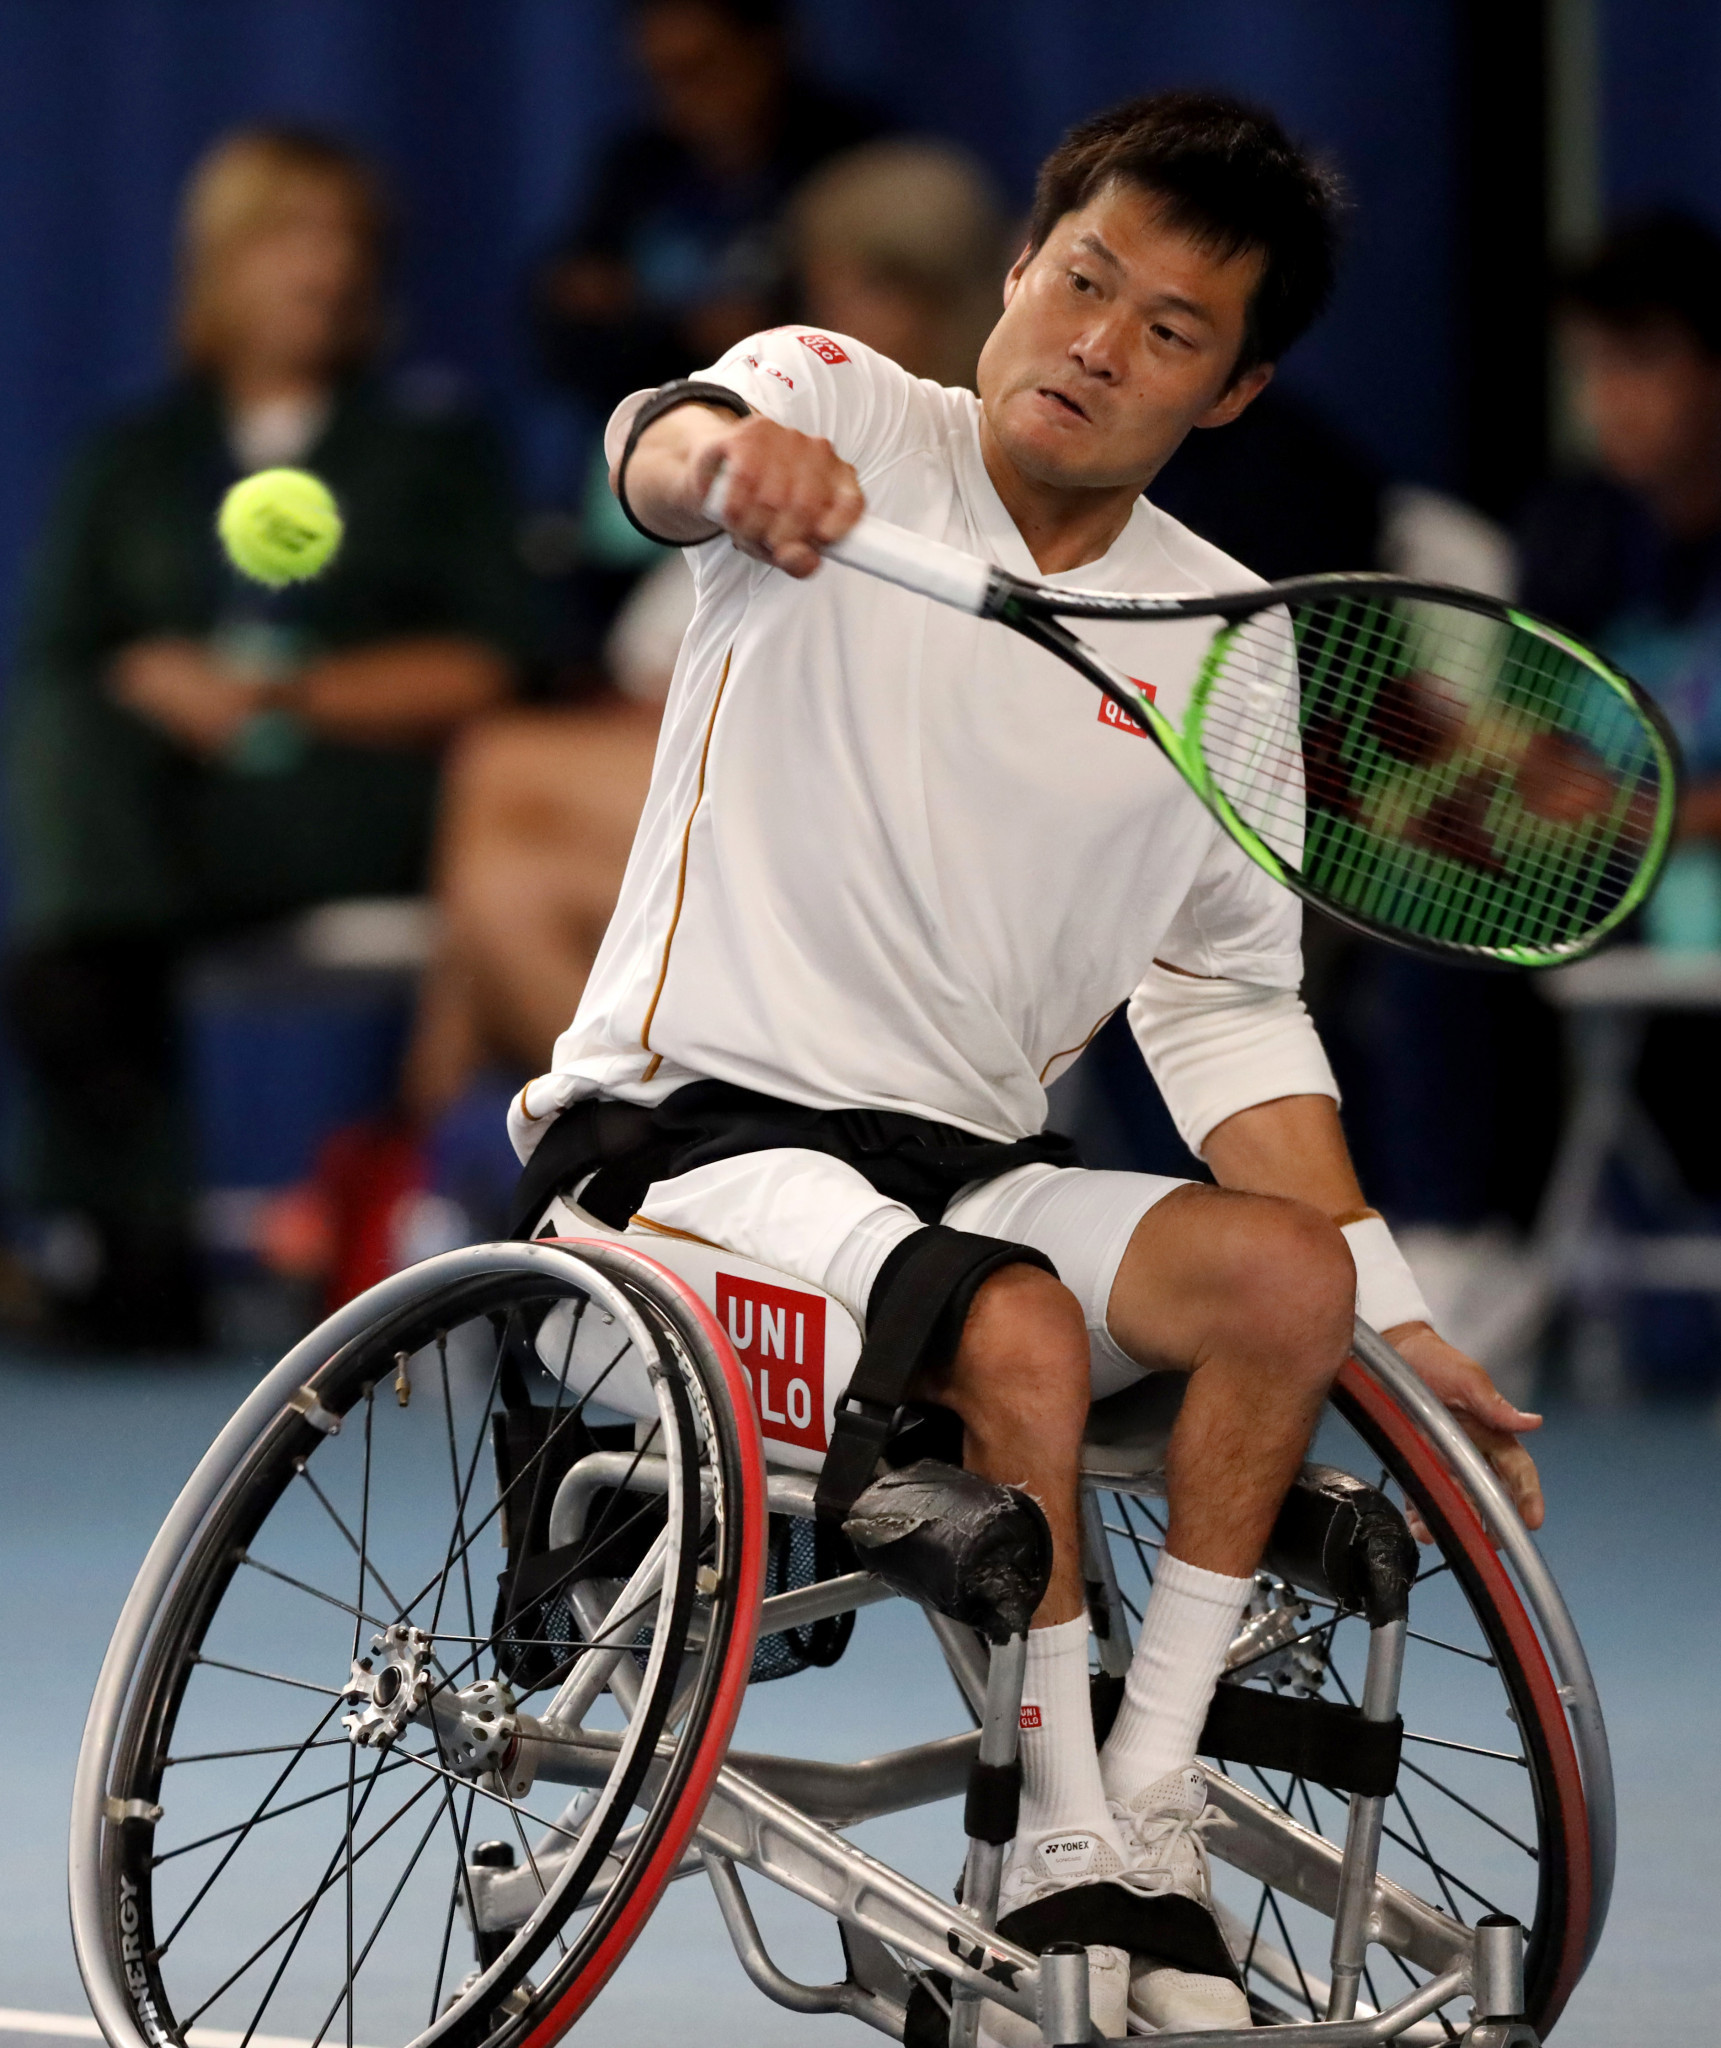 A survey of 3,000 Japanese people by Dentsu showed that 23 per cent of the population could name double Paralympic tennis champion and multiple Grand Slam winner Shingo Kuneida ©Getty Images